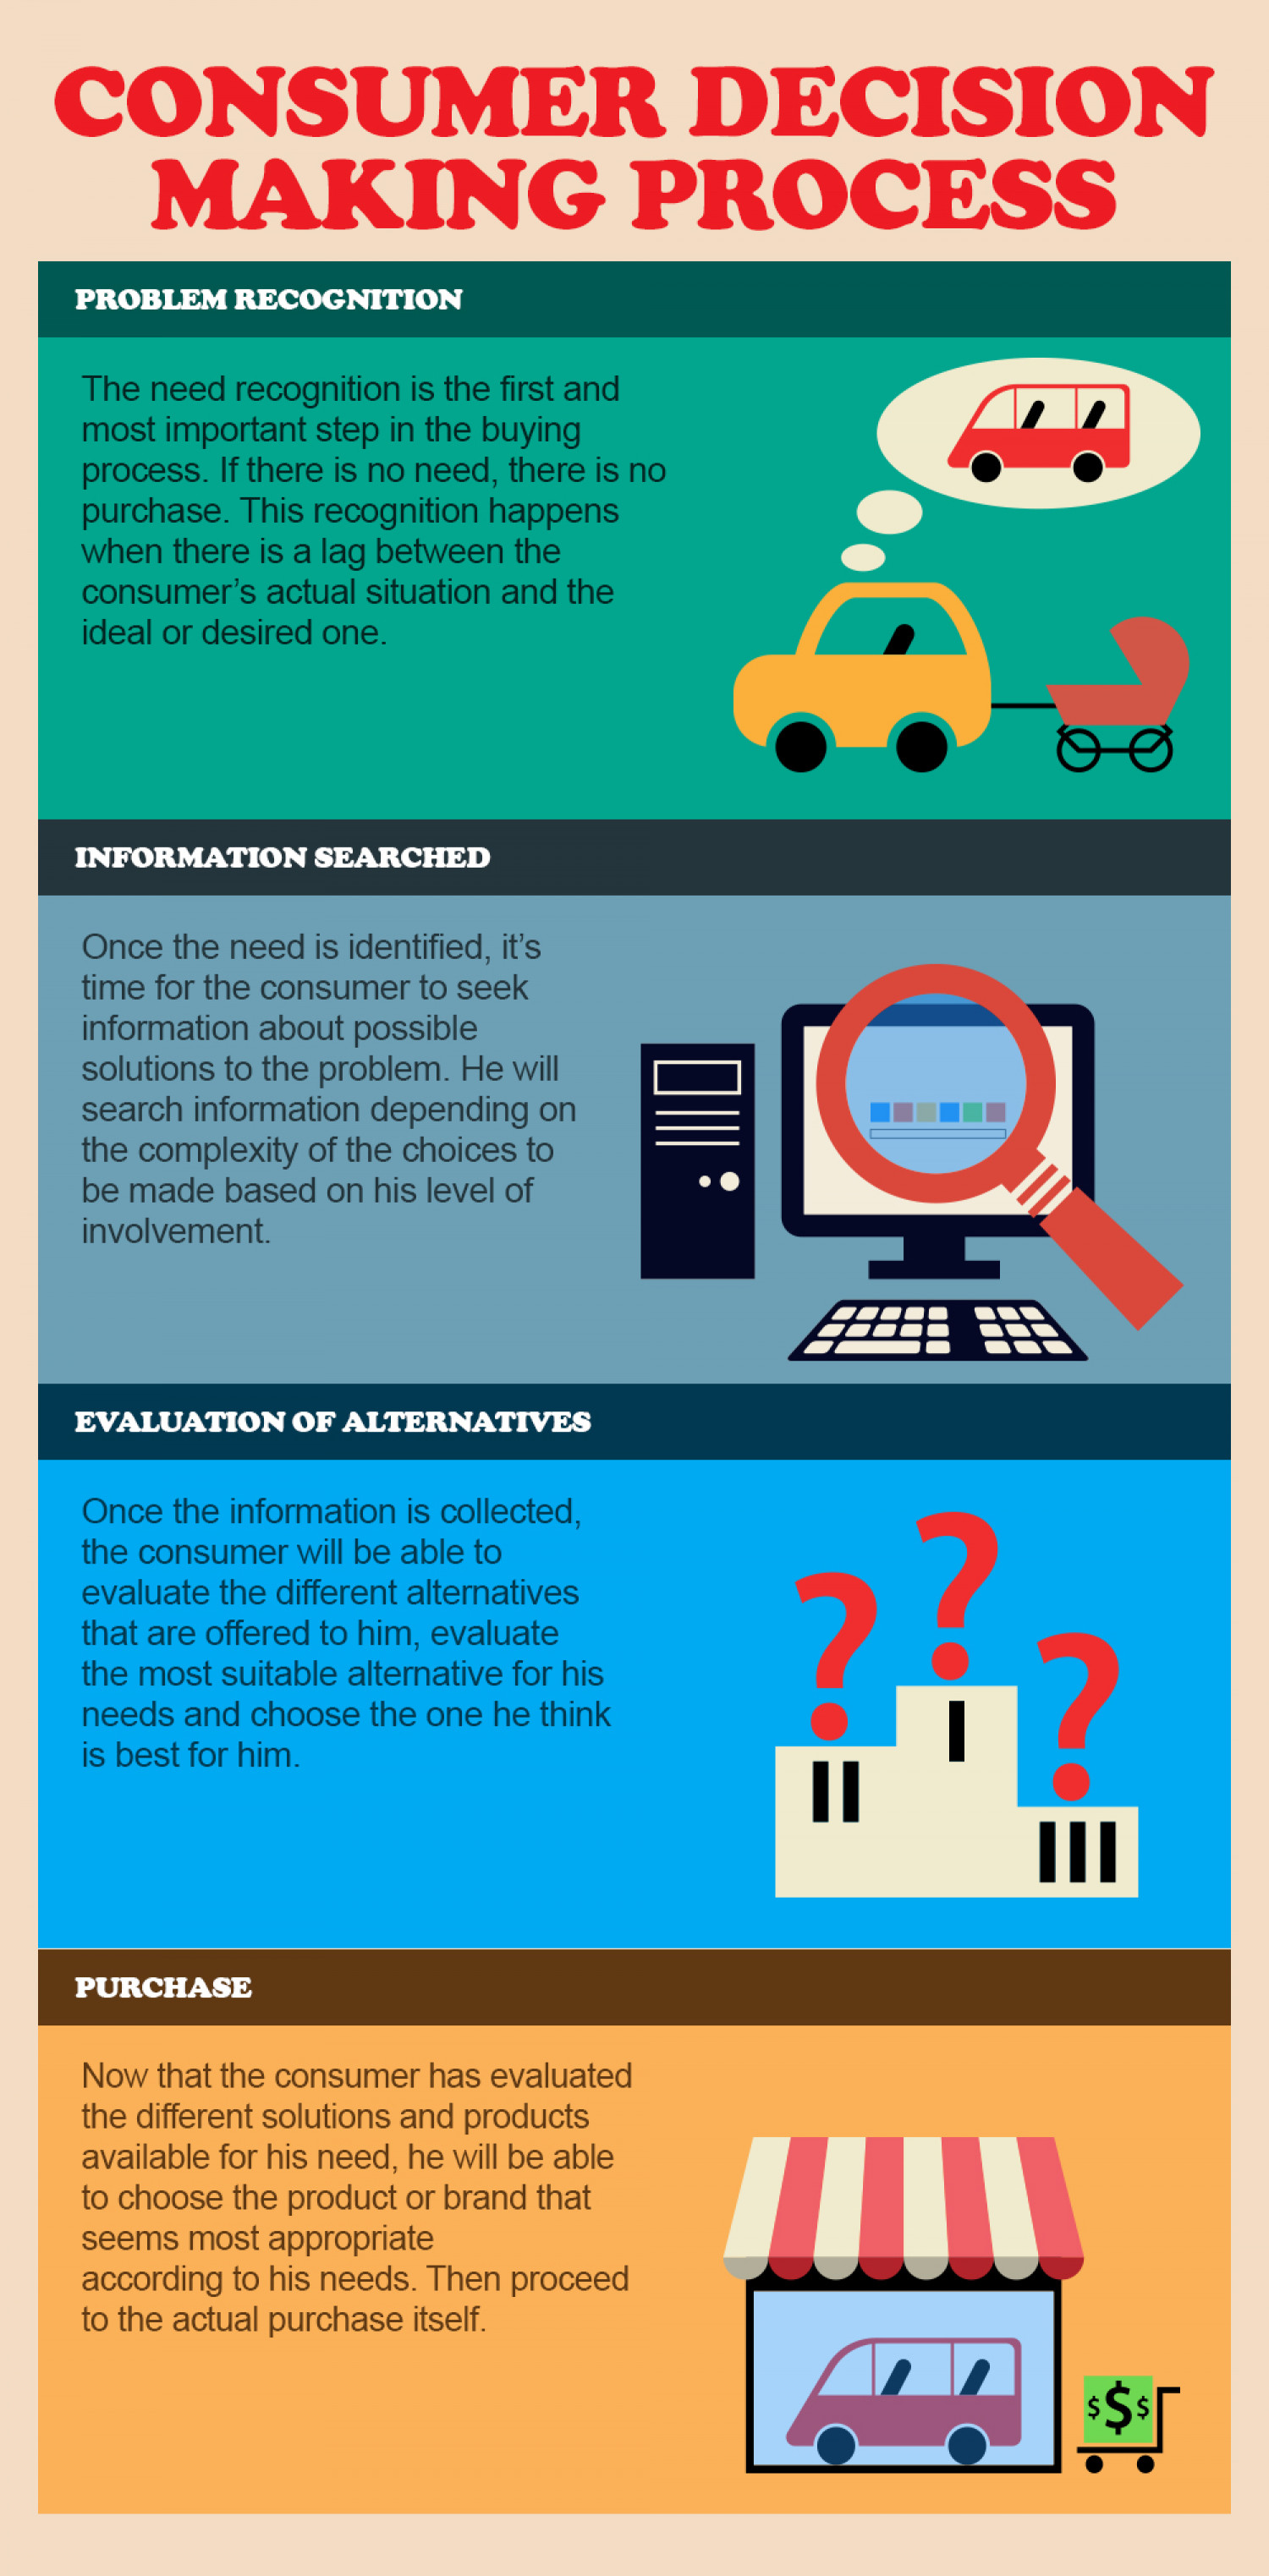 4 Stages Of Consumer Decision Making Process Infographic